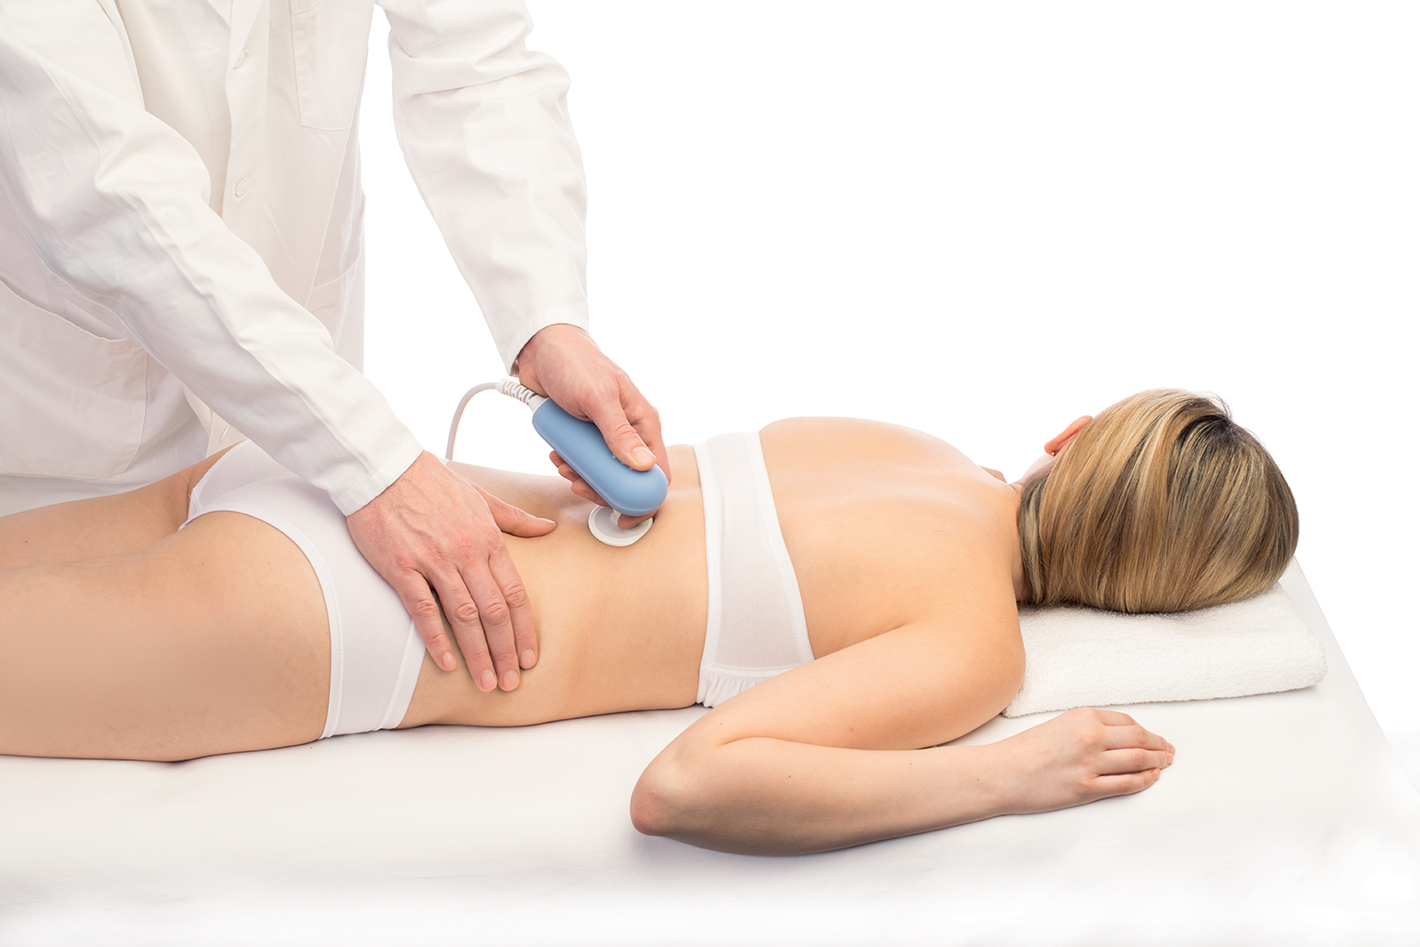 BTL Medical Physio, Pain Management, Targeted Radiofrequency Therapy